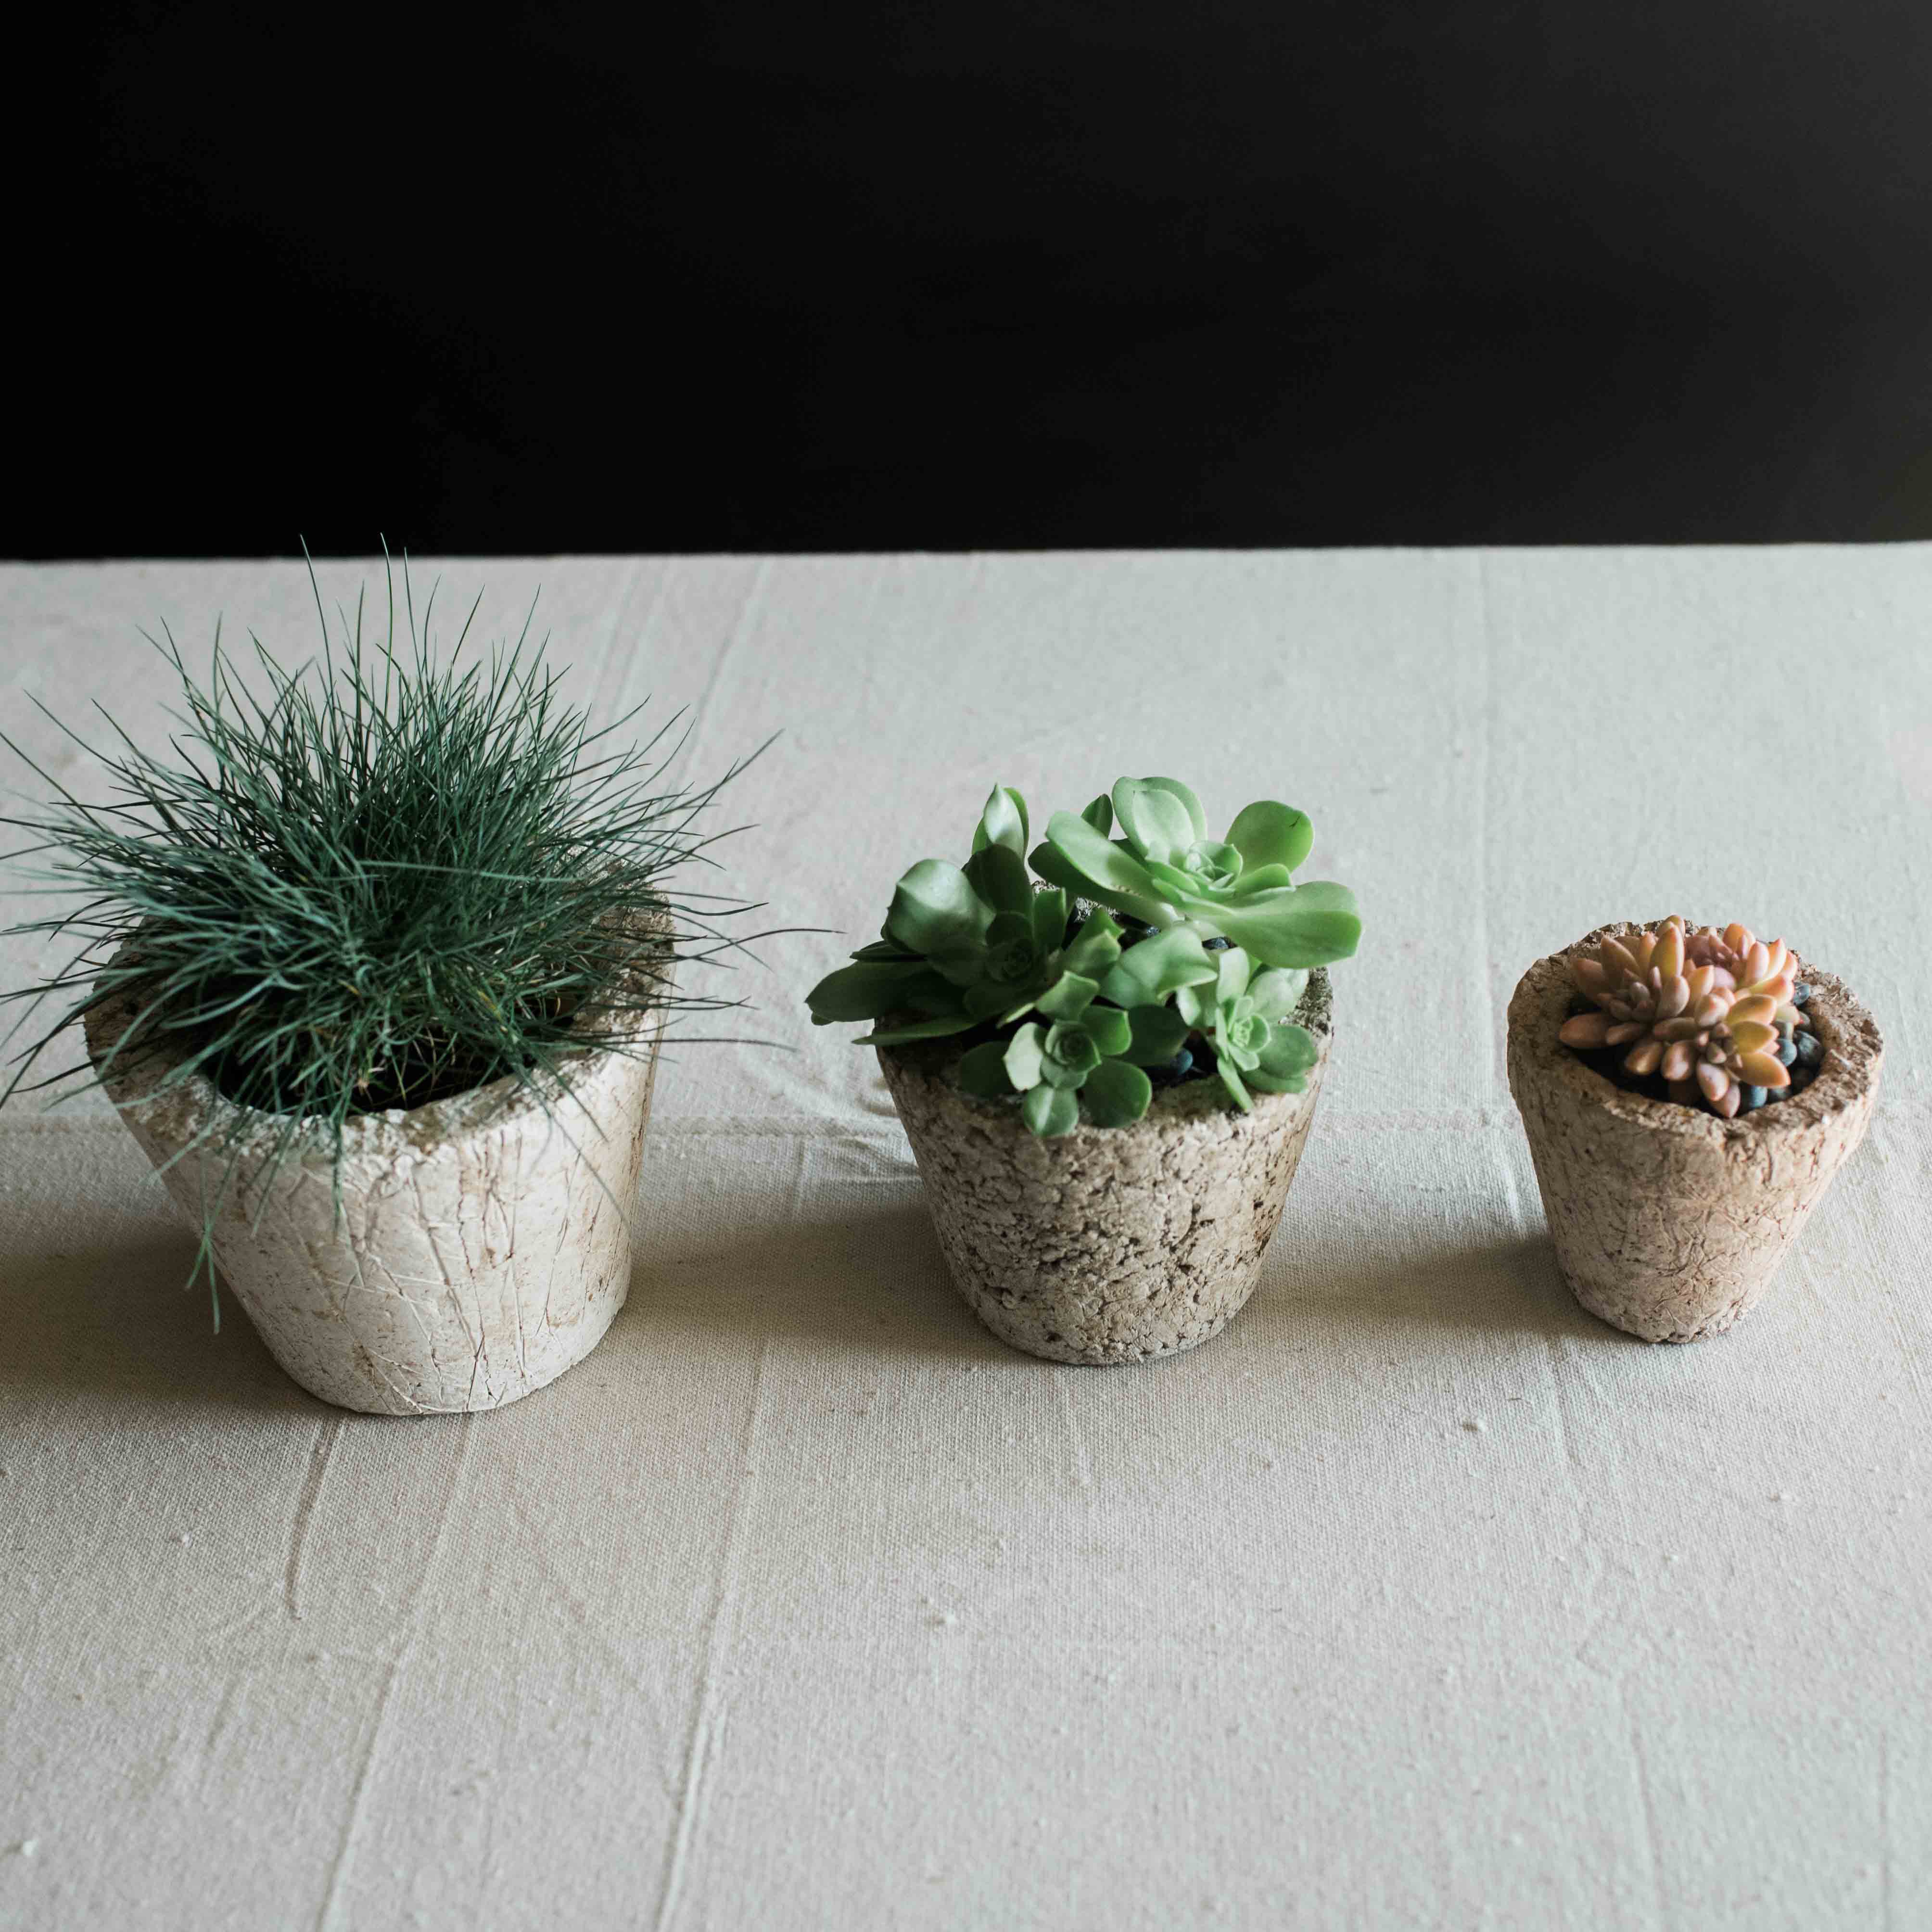 Our lightweight, durable handmade pozzola planters are the perfect starter pot for any plant in your garden. It's an ideal environment for healthy plants made of plant based and earth-friendly ingredients. Pozzola has the feel and texture of stone but is ultra light weight and come in natural shades of bone and slate grey. Each comes planted with a seasonal succulent and comes with an option of 3", 4" or 6" Diameters. These also make great gifts, send living arrangements instead of cut flowers.